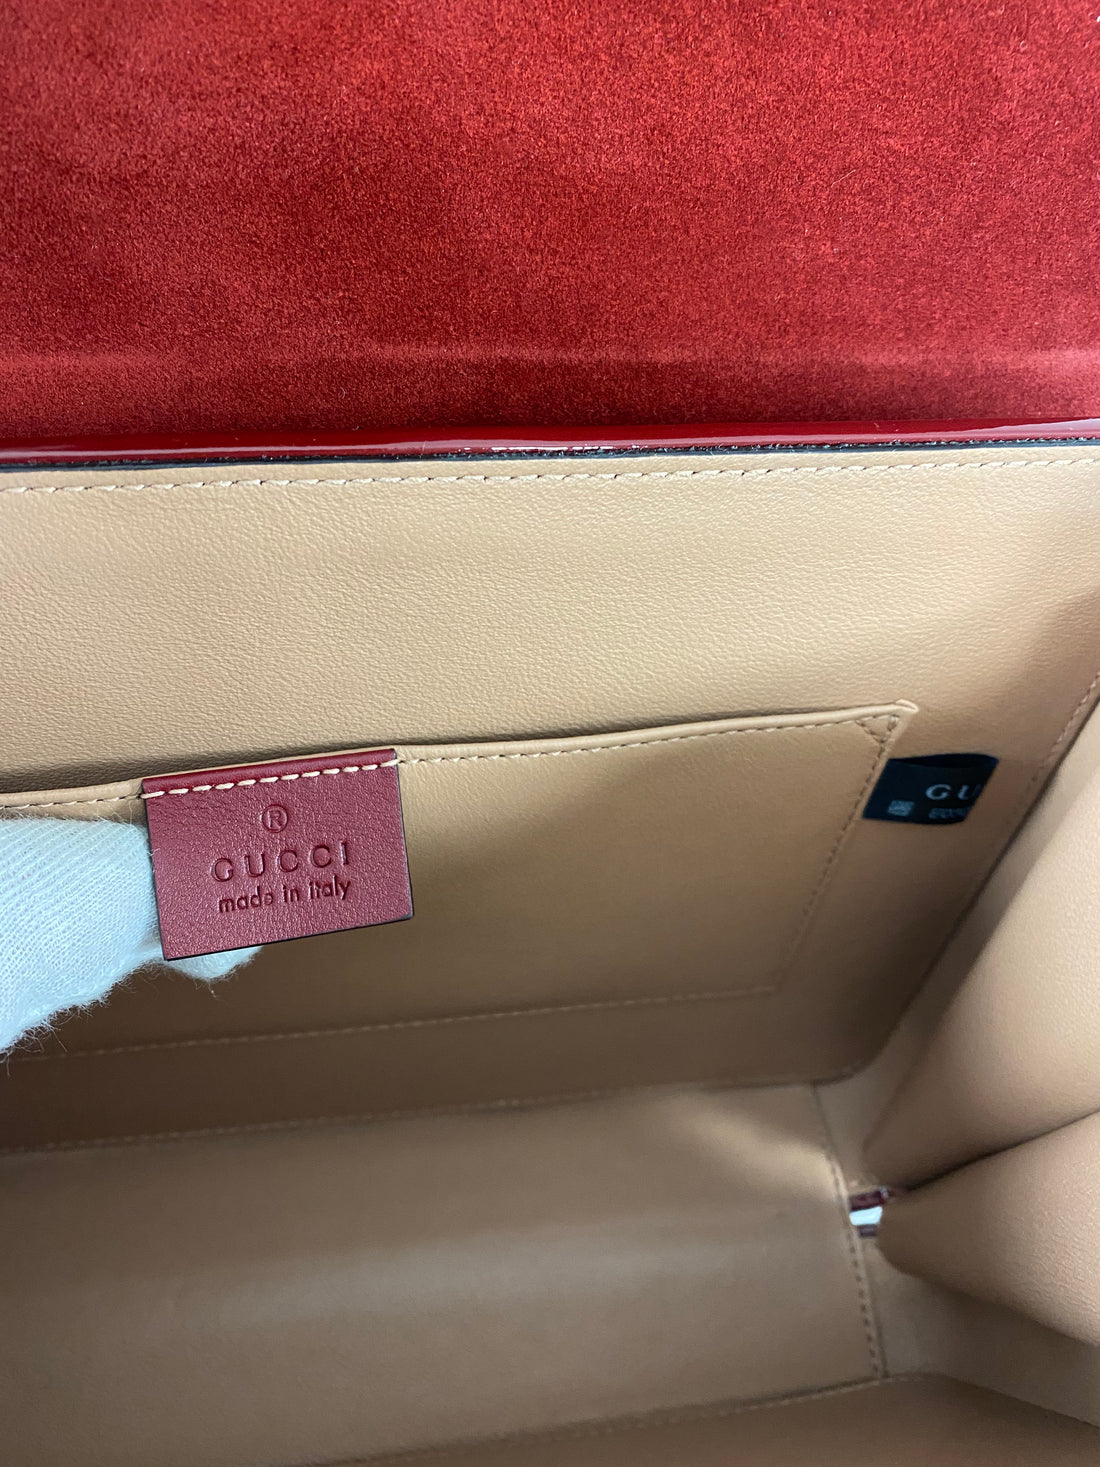 Gucci 1969 Sylvie Small Red Patent Top Handle Two-Way Bag